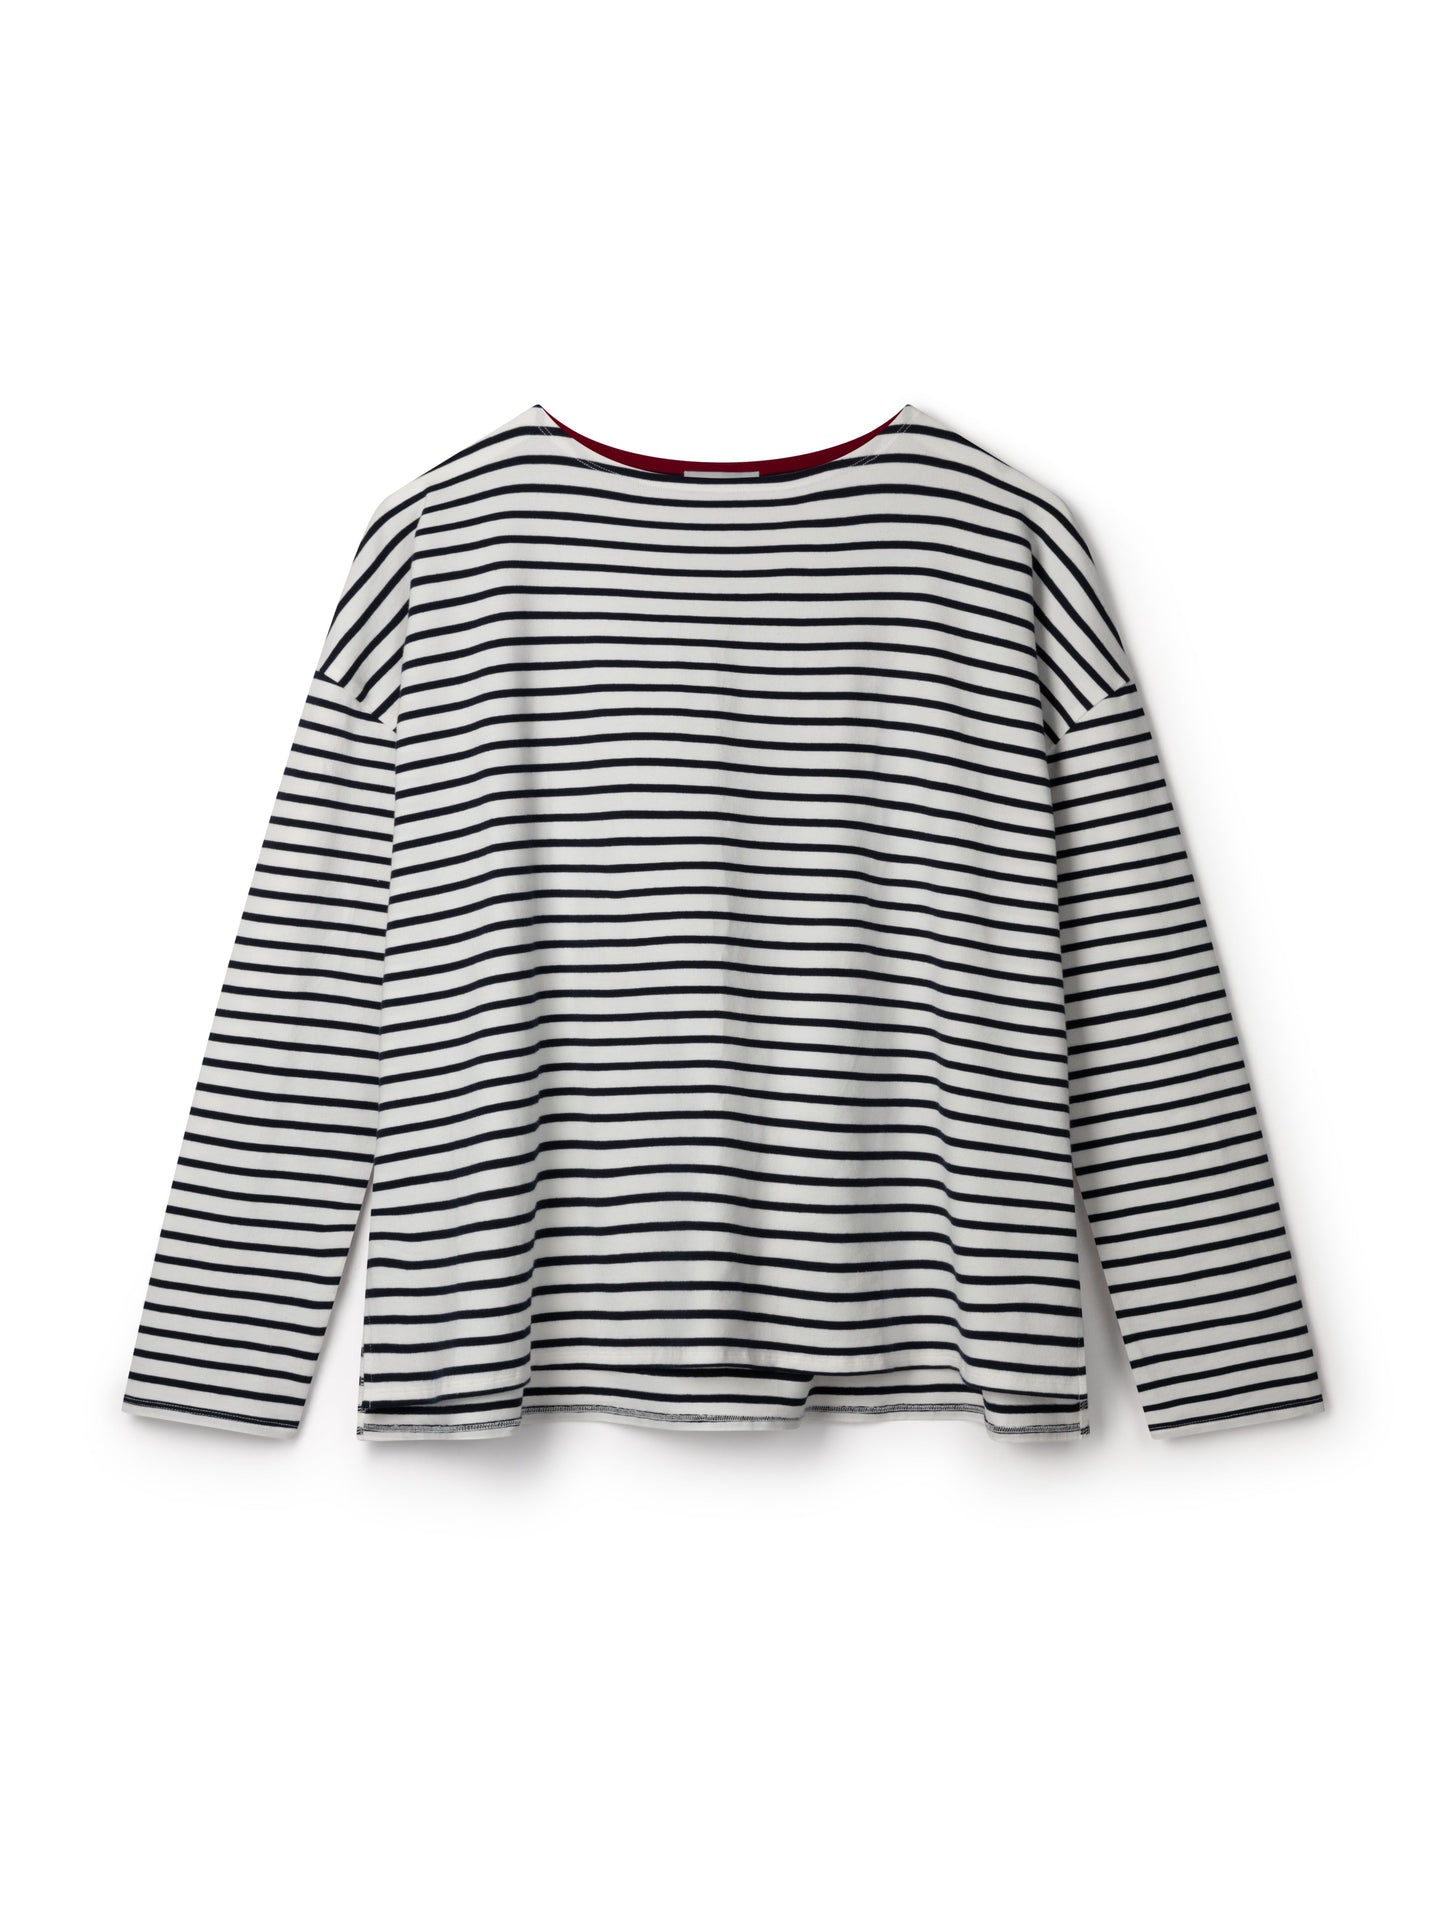 Chalk Bryony Stripe Top in Navy and White